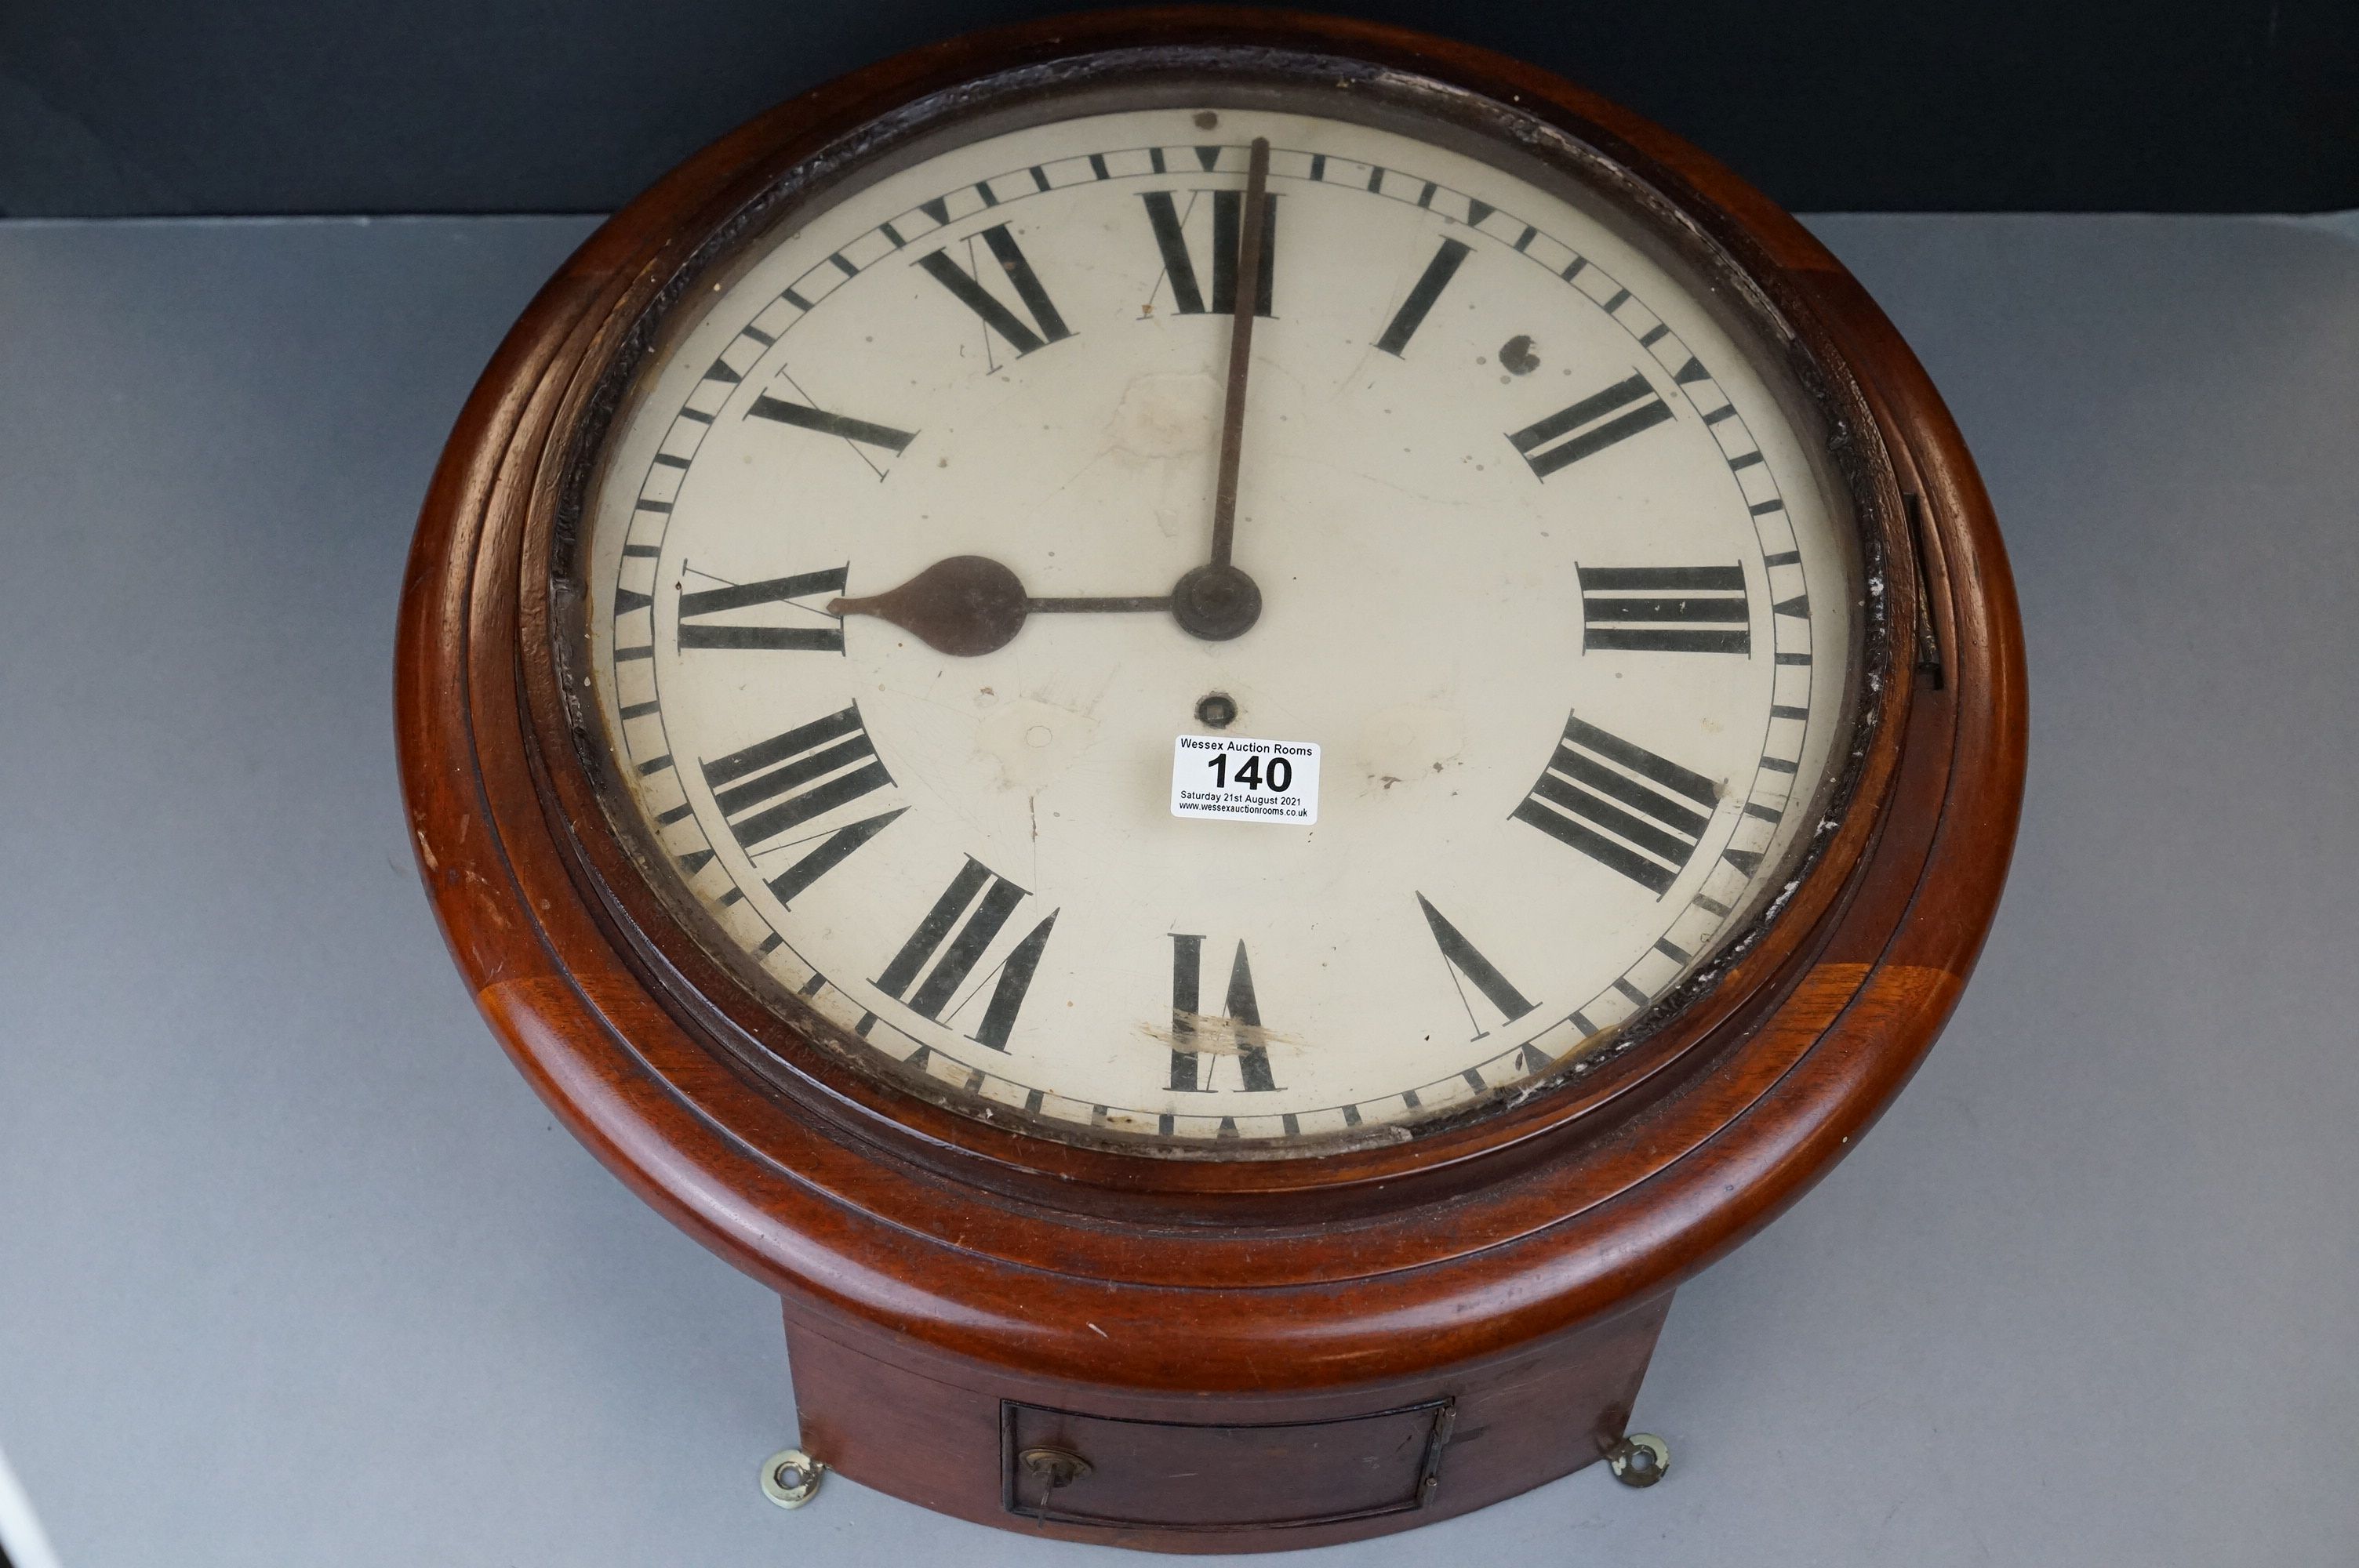 Late 19th / Early 20th century Circular Mahogany Cased Classroom or Station Clock, with Roman